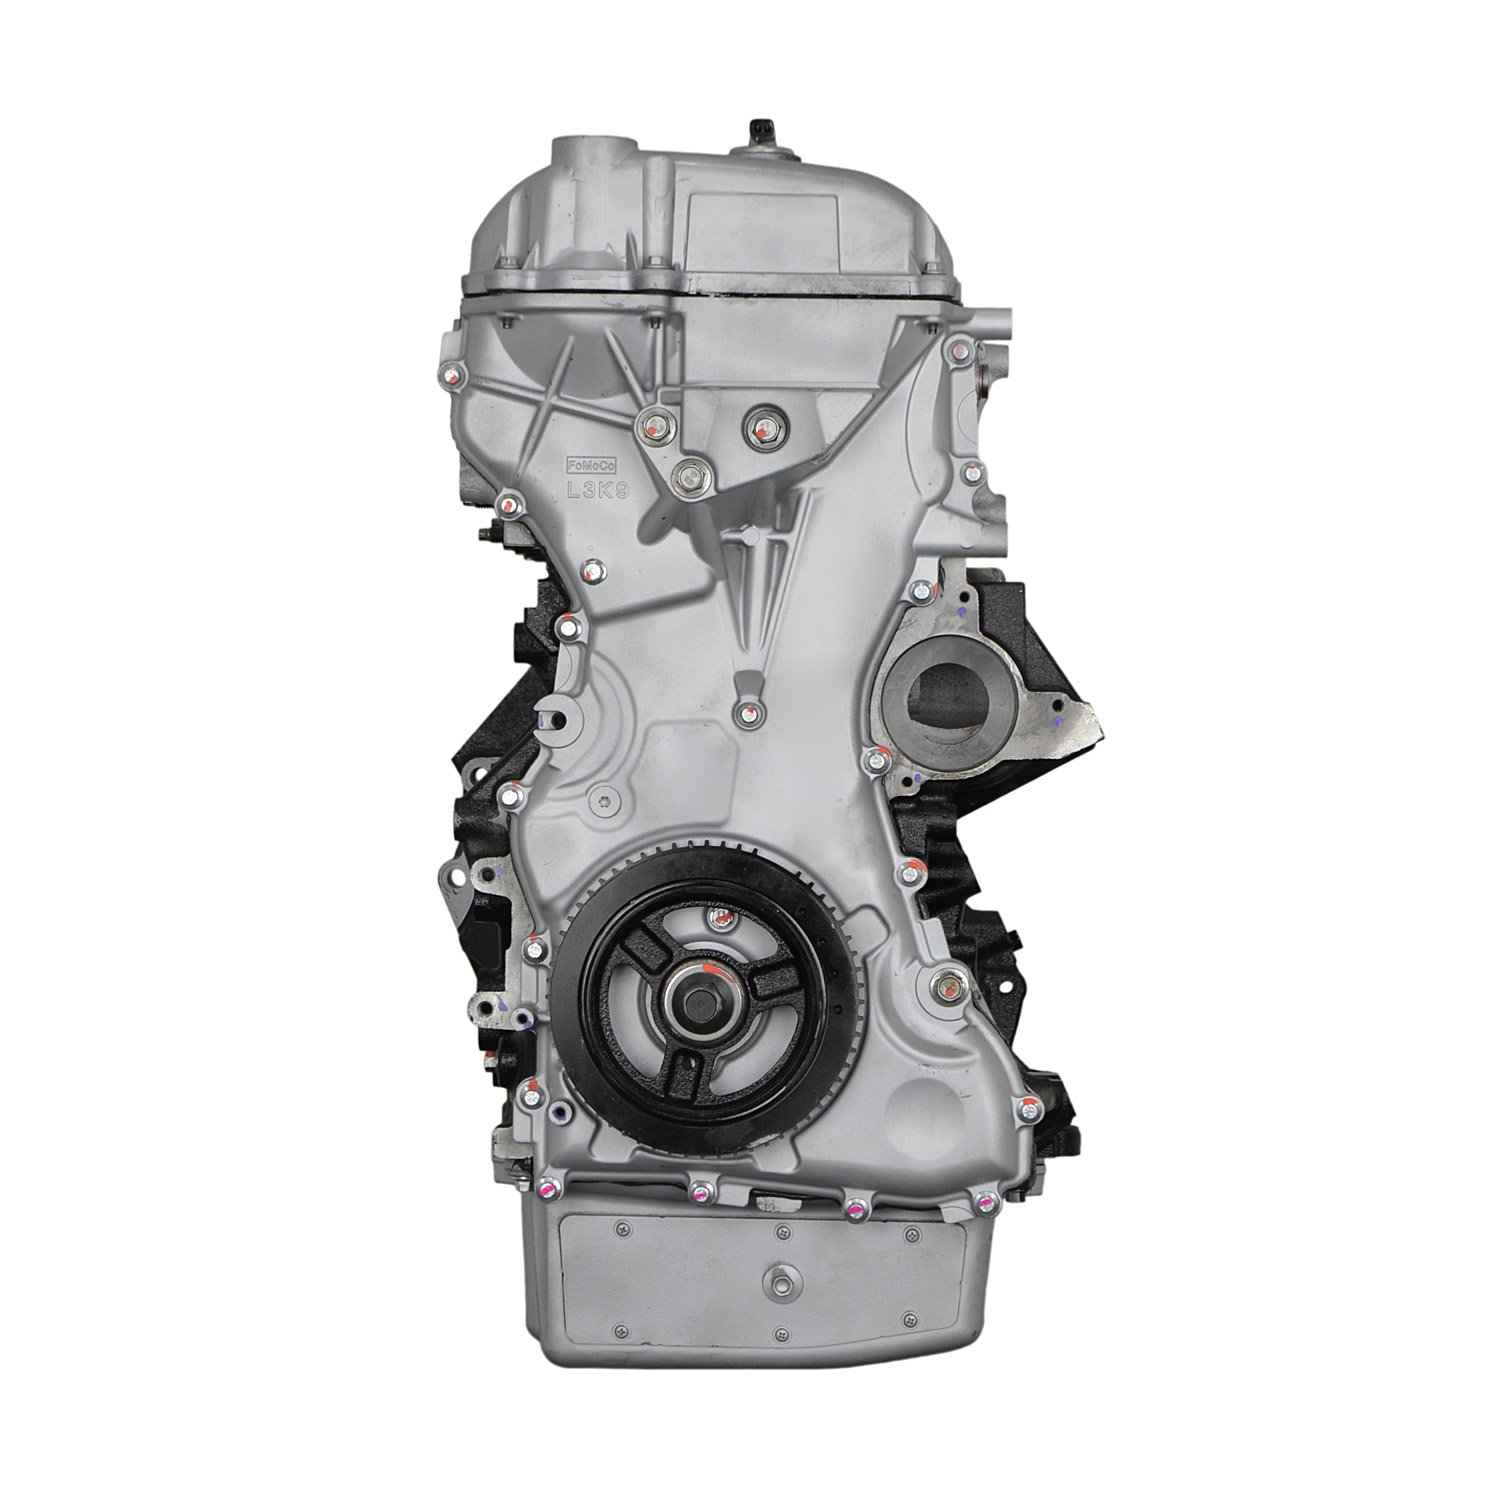 VFFR Remanufactured Crate Engine for 2006-2012 Mazda with Turbo 2.3L L4